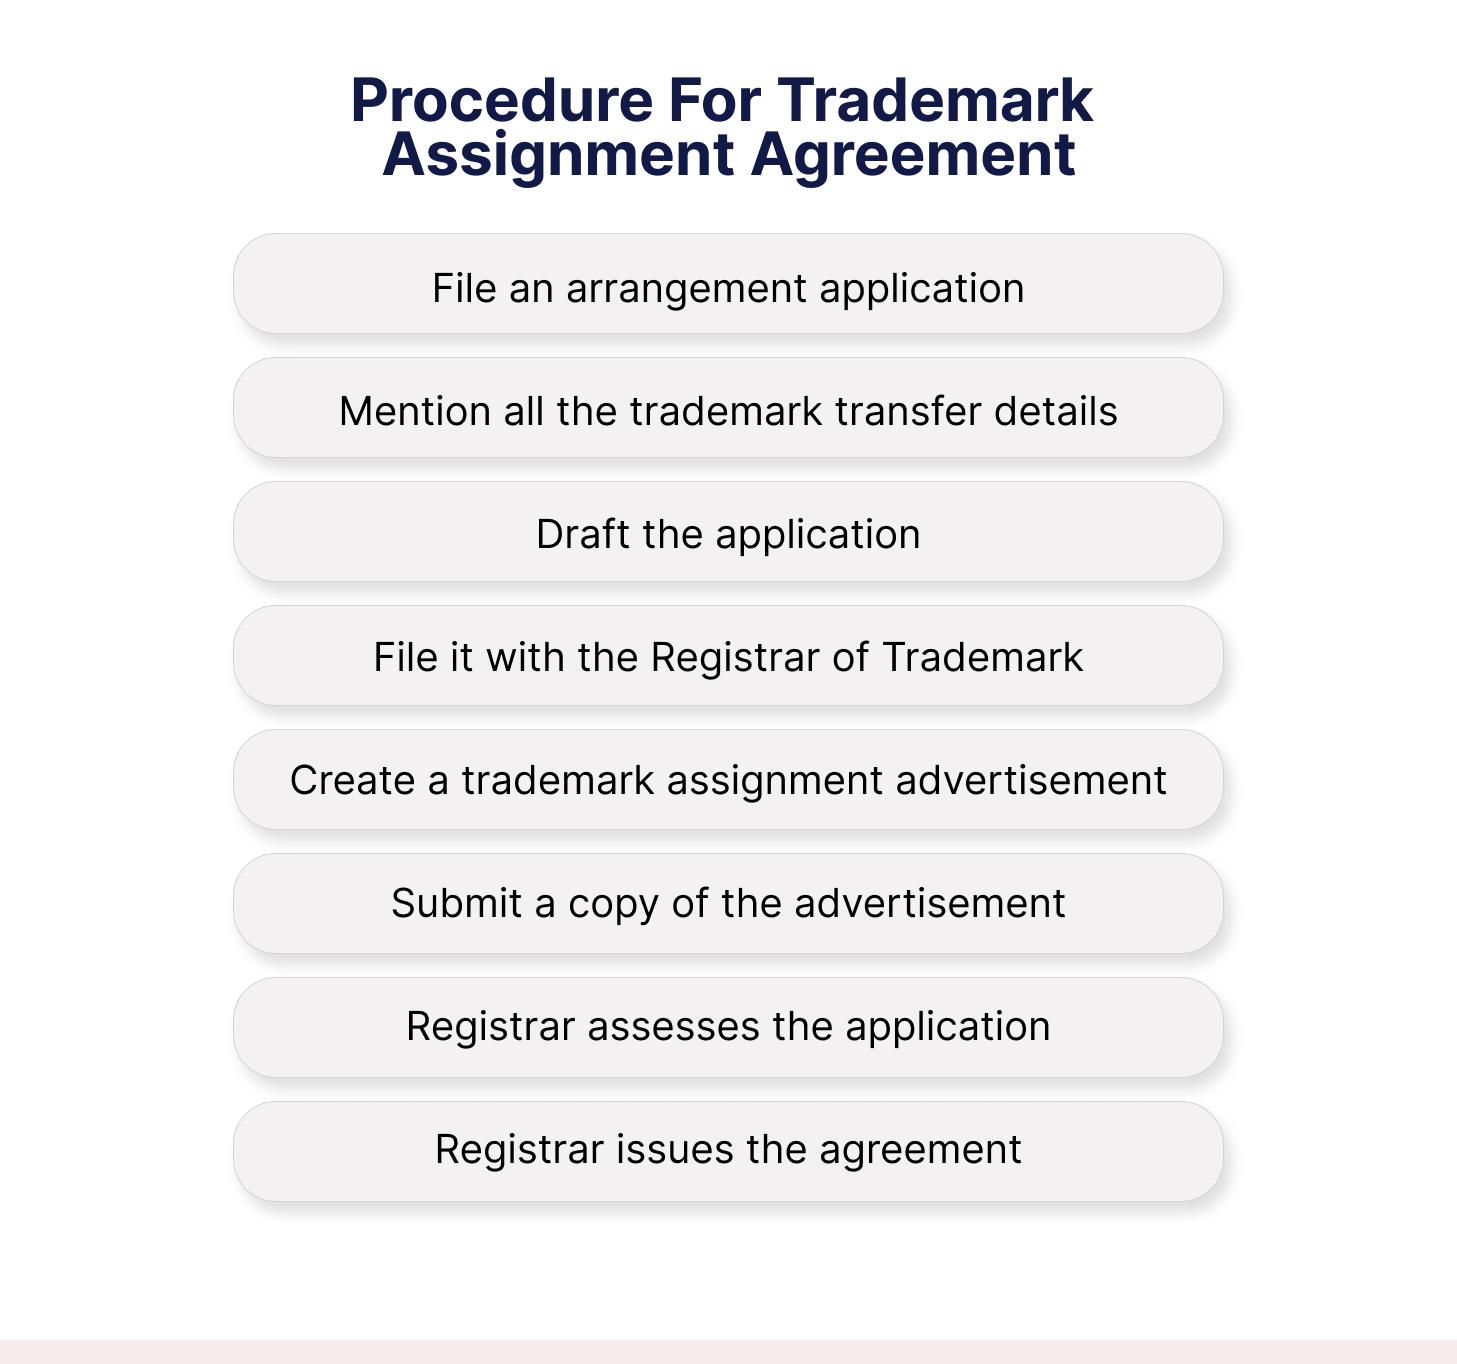 Process for Trademark Assignment 